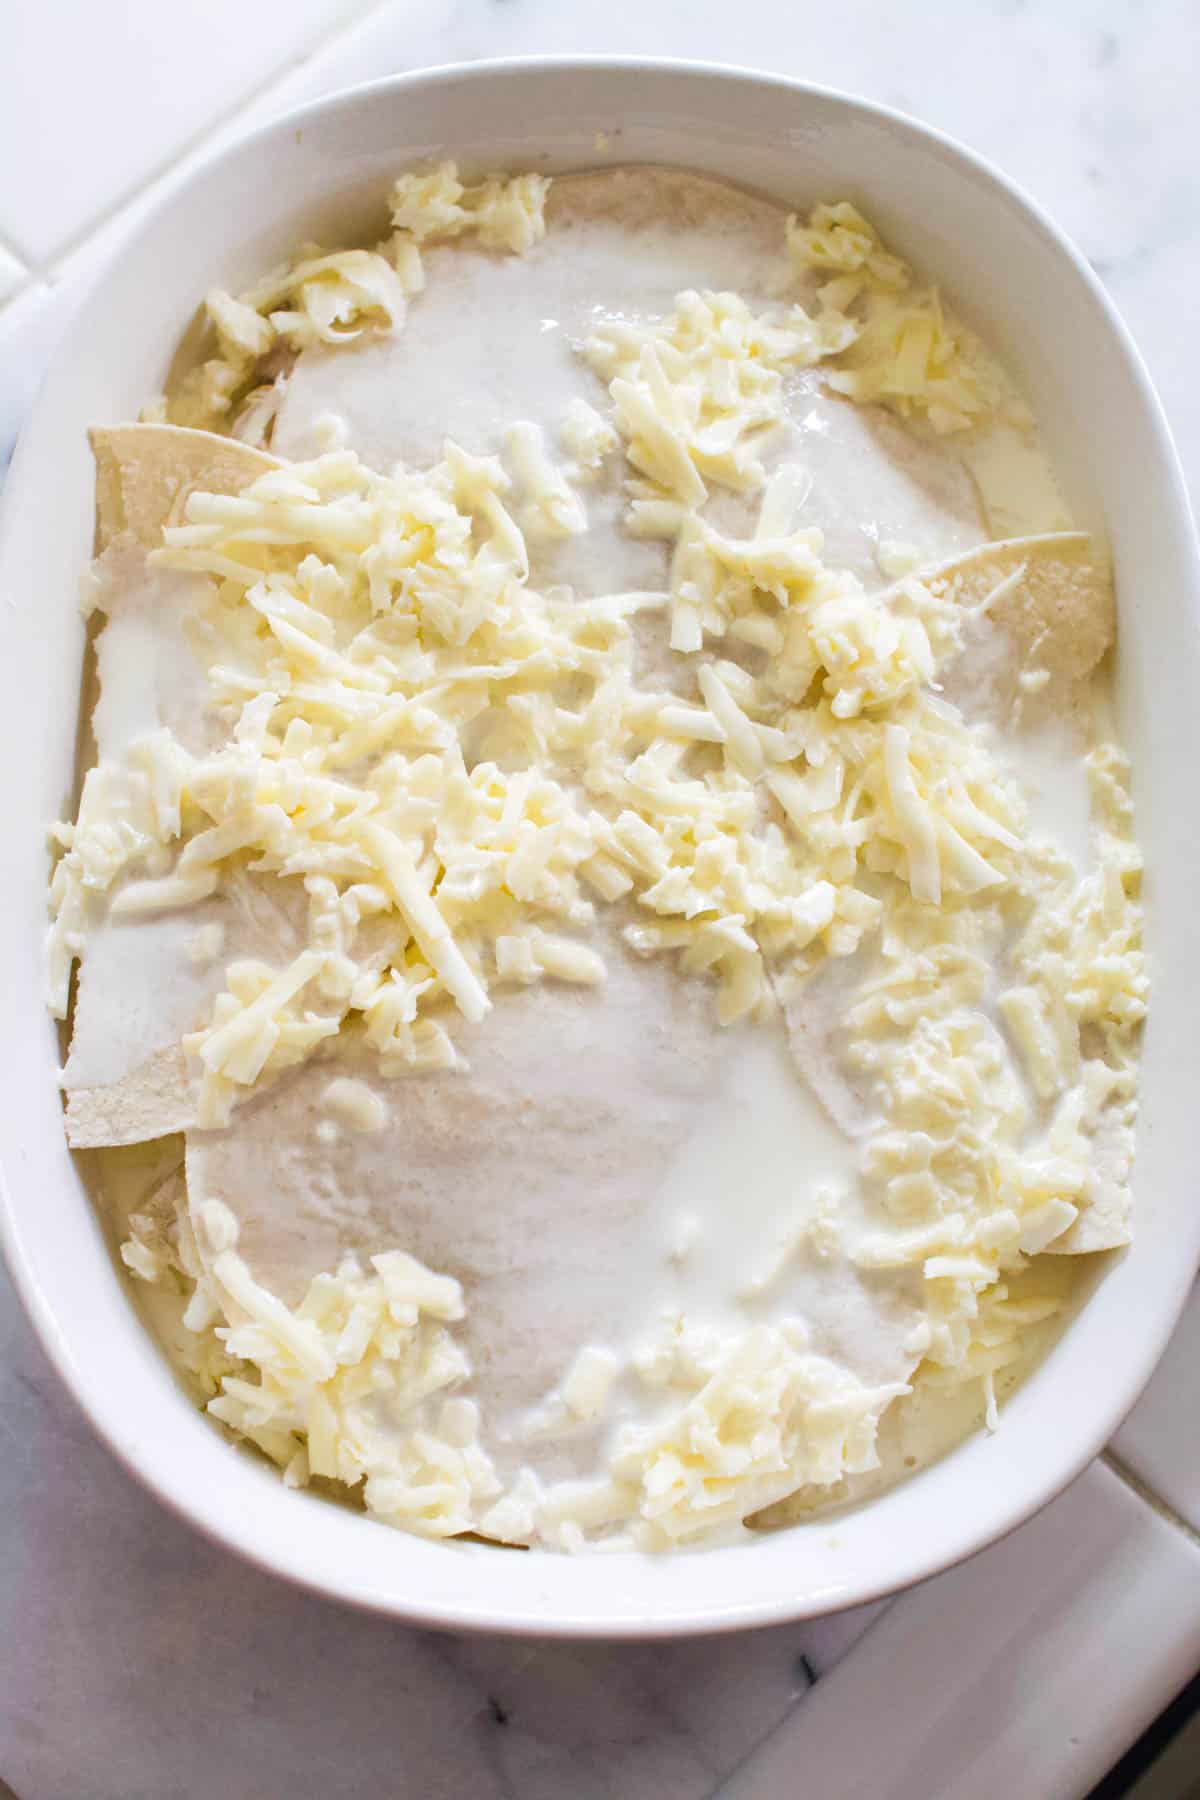 Overhead view of a baking dish with a casserole covered in cream sauce.